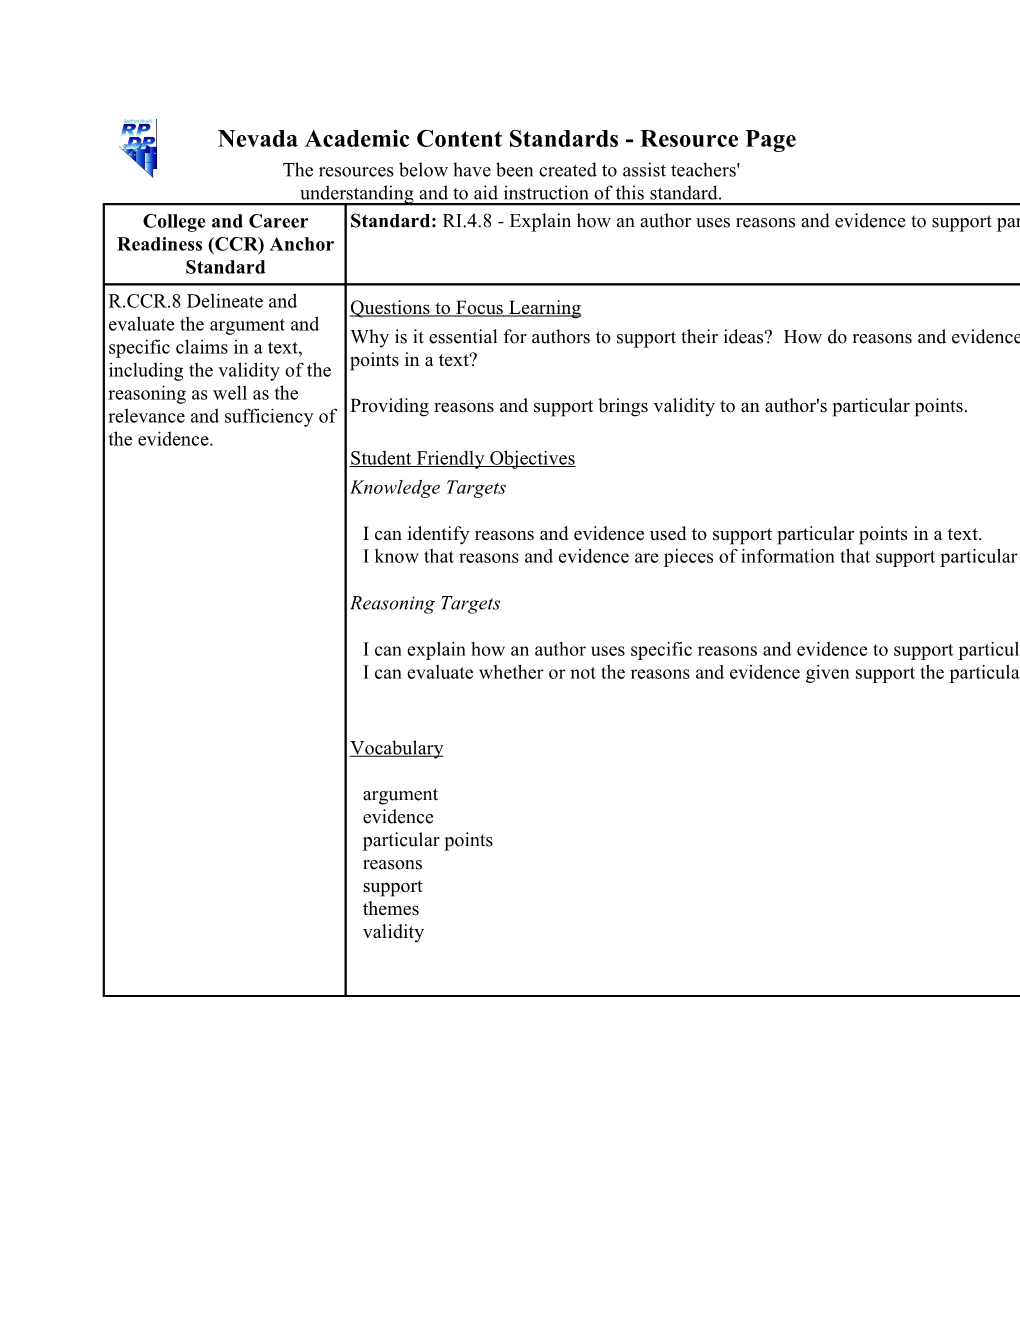 Unwrapped Standards: RI.4.8 - Explain How an Author Uses Reasons and Evidence to Support